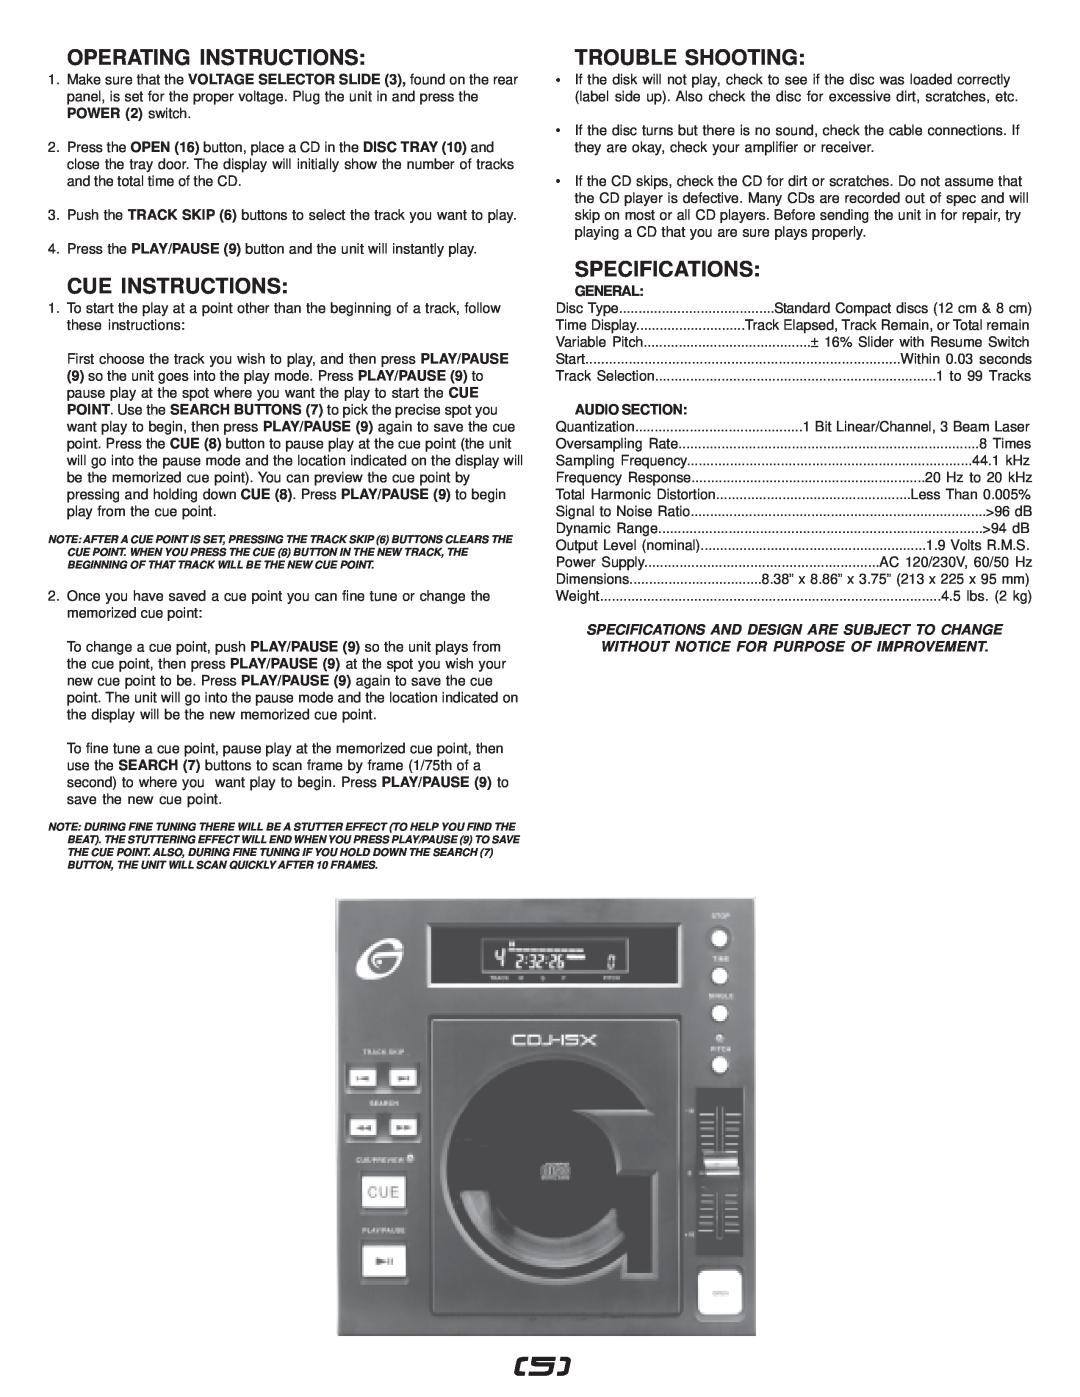 Gemini CDJ-15X manual Operating Instructions, Cue Instructions, Trouble Shooting, Specifications, General, Audio Section 